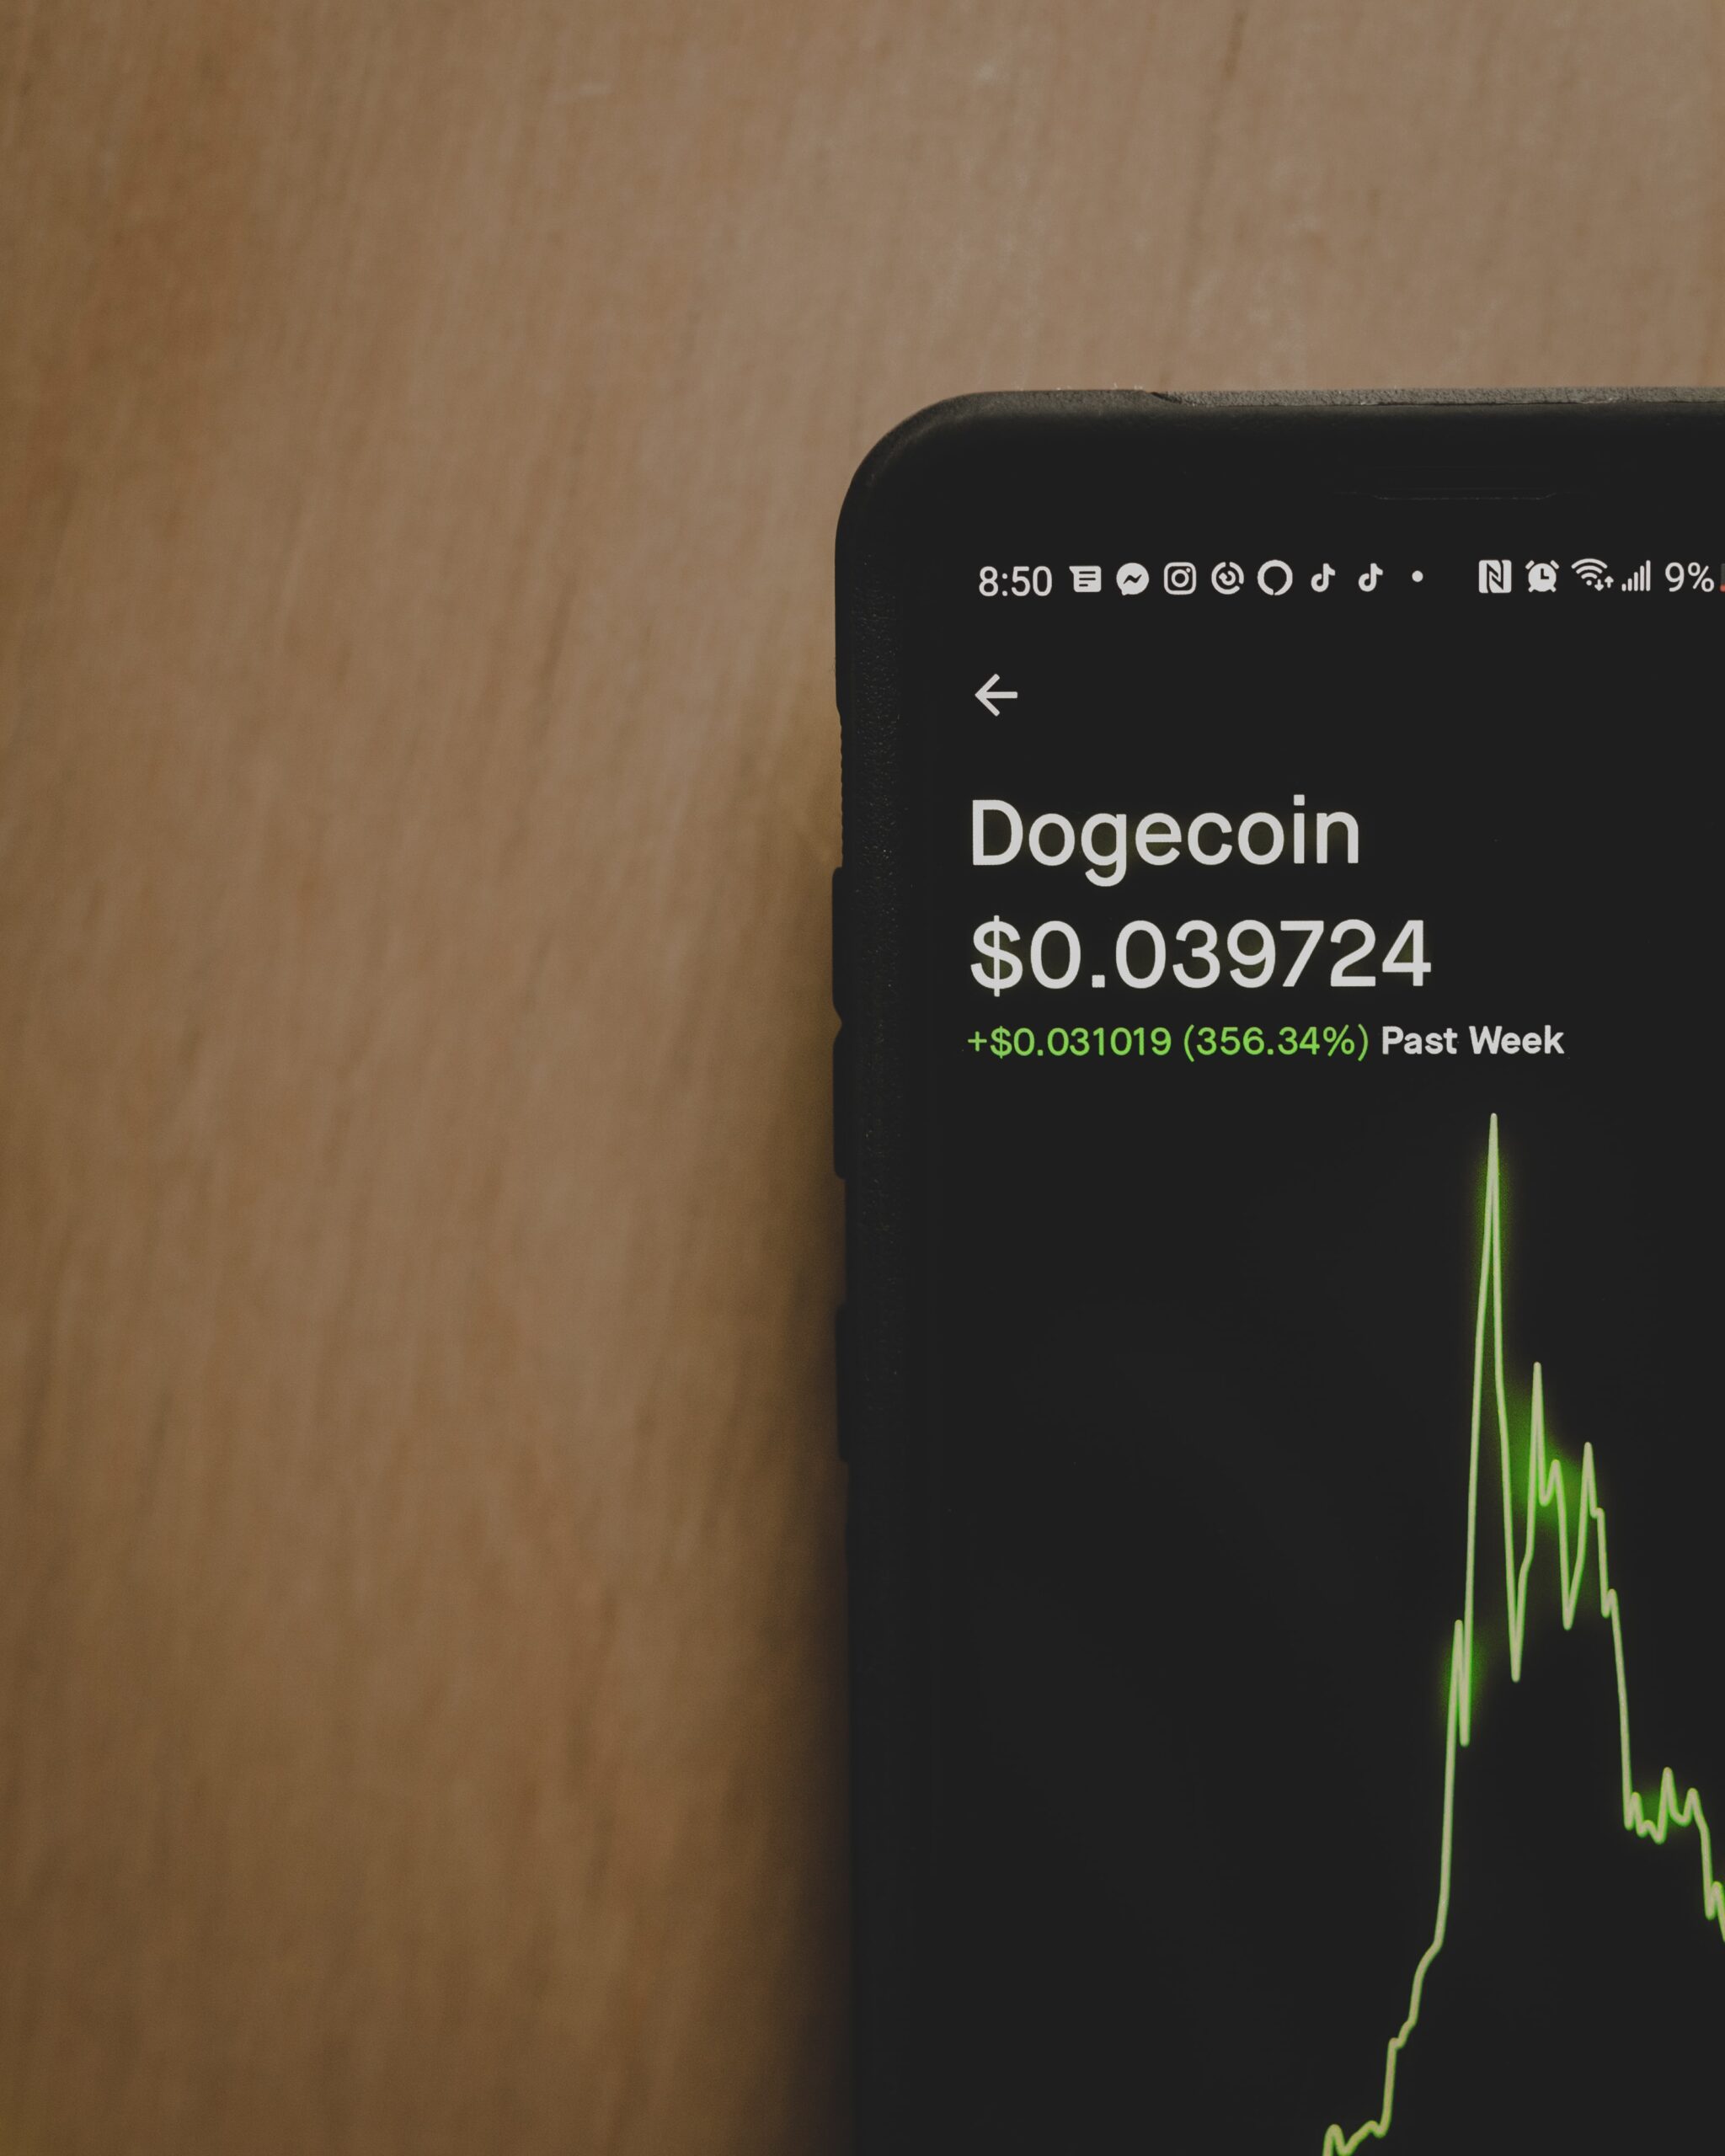 All you need to know about Cryptocurrencies in India - Dogecoin